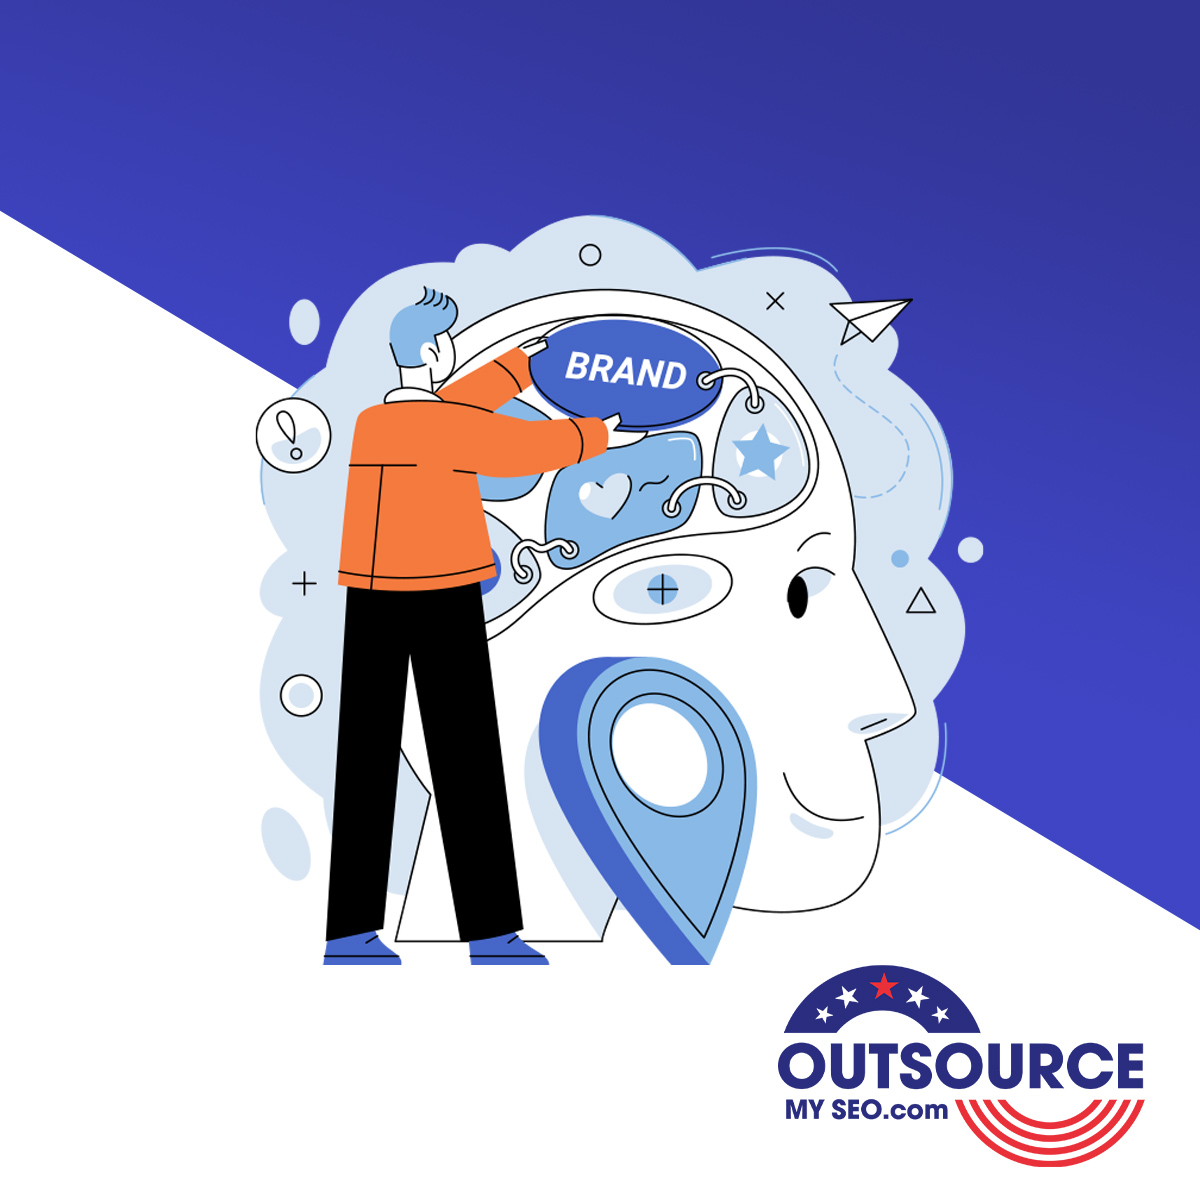 Elevate your brand's image effortlessly! Discover how outsourcing SEO can craft a unified, attention-grabbing brand identity for your business. 🚀 bit.ly/3VKOig5 #BrandImage #SEOOutsourcing #DigitalMarketing #whitelabel #seo #seotips #outsource